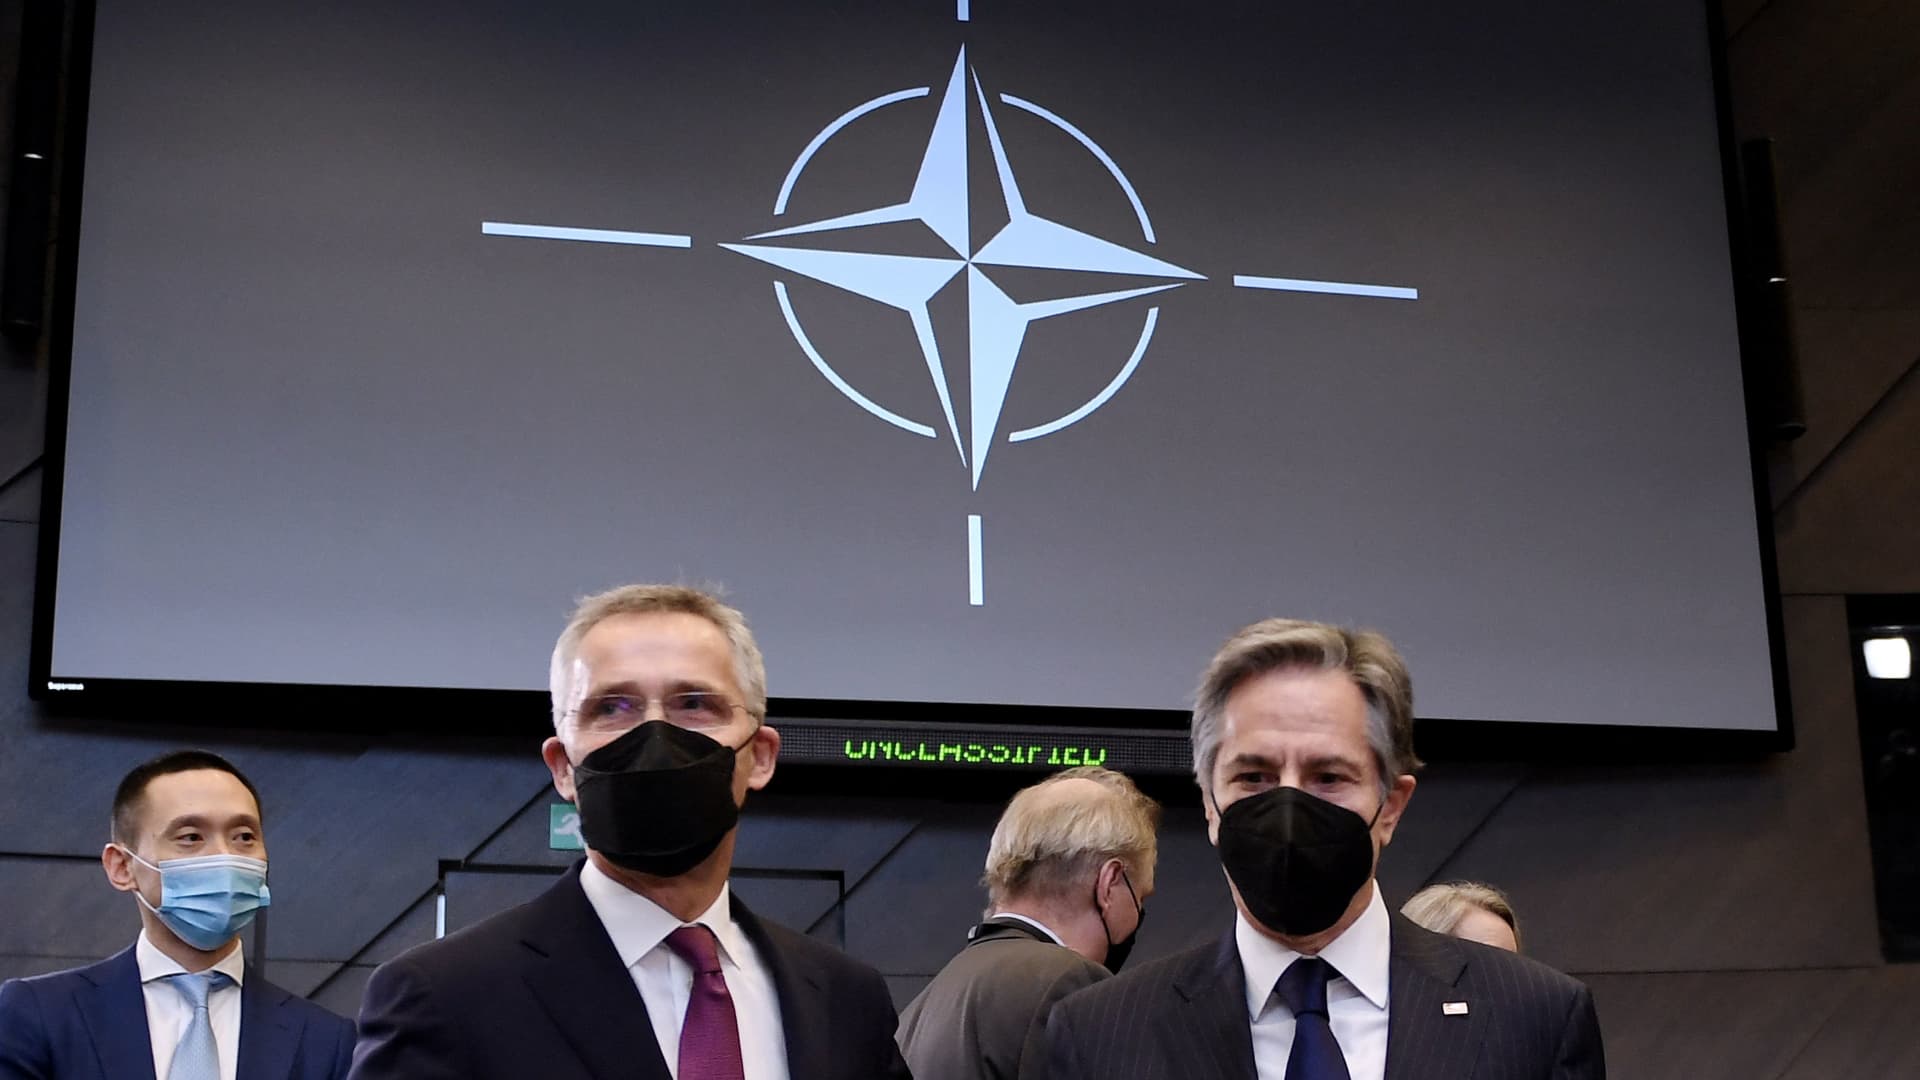 US State Secretary Antony Blinken and NATO Secretary General Jens Stoltenberg participate in a meeting of North Atlantic Council (NAC) in Foreign Ministers' session at the NATO Headquarters in Brussels, Belgium, March 4, 2022.